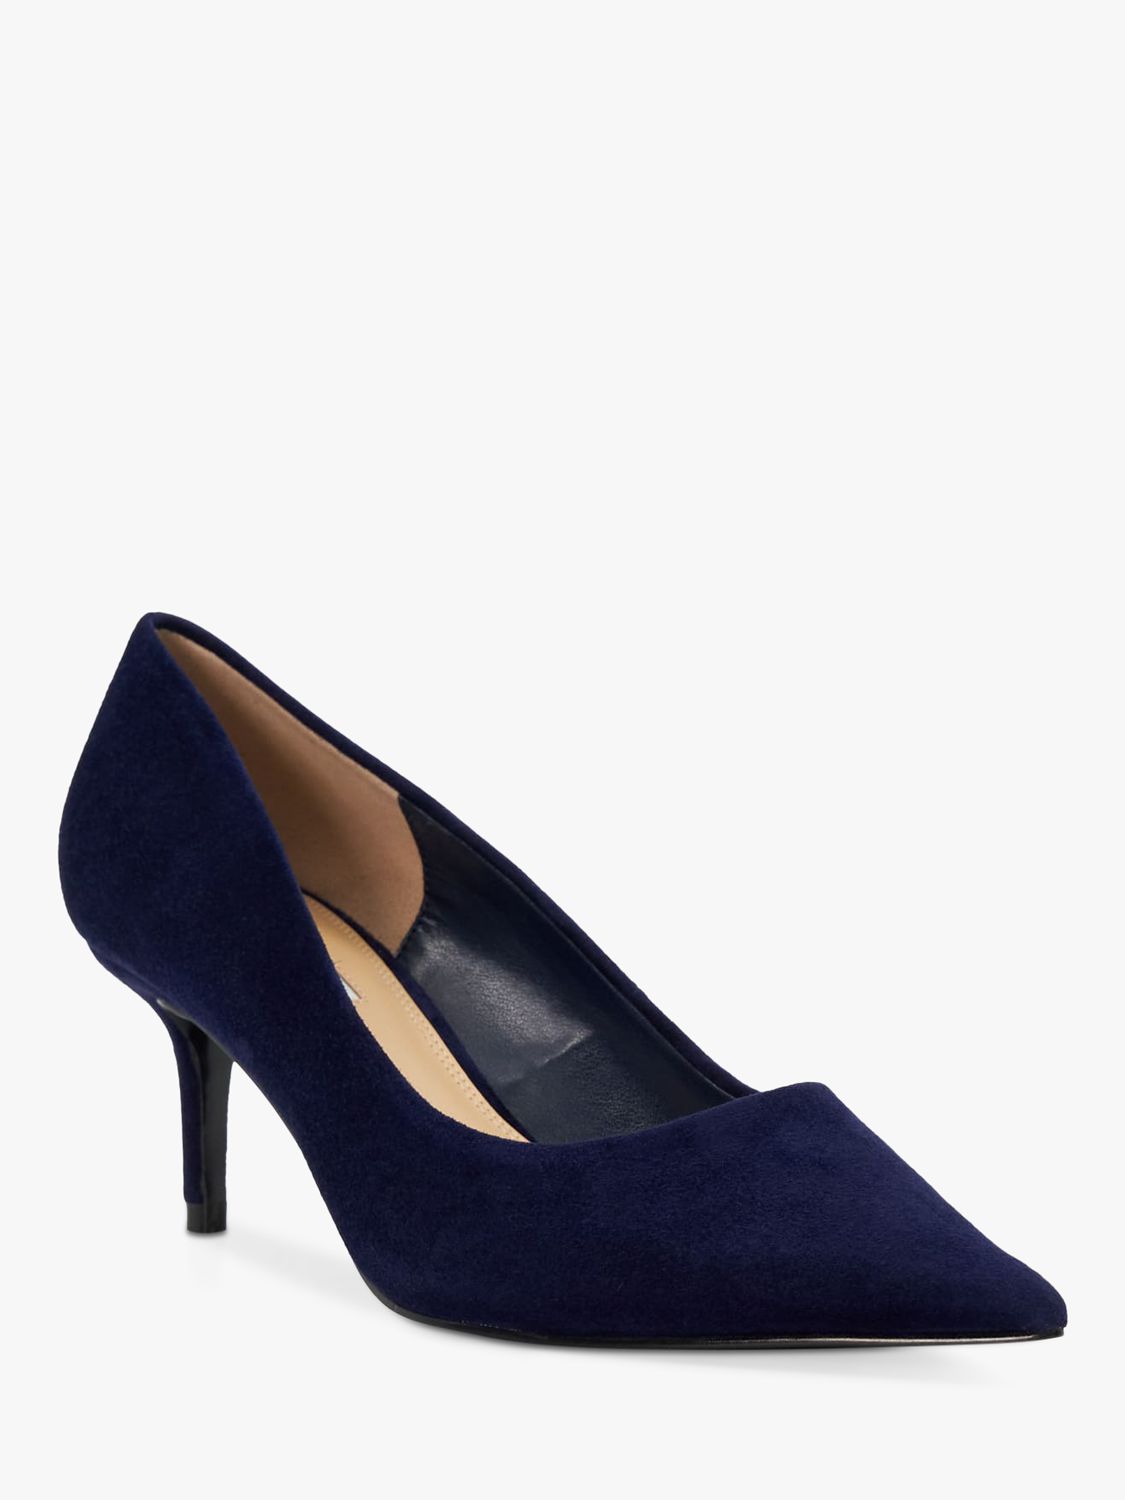 Dune Absolute Suede Pointed Toe Court Shoes, Navy, EU36